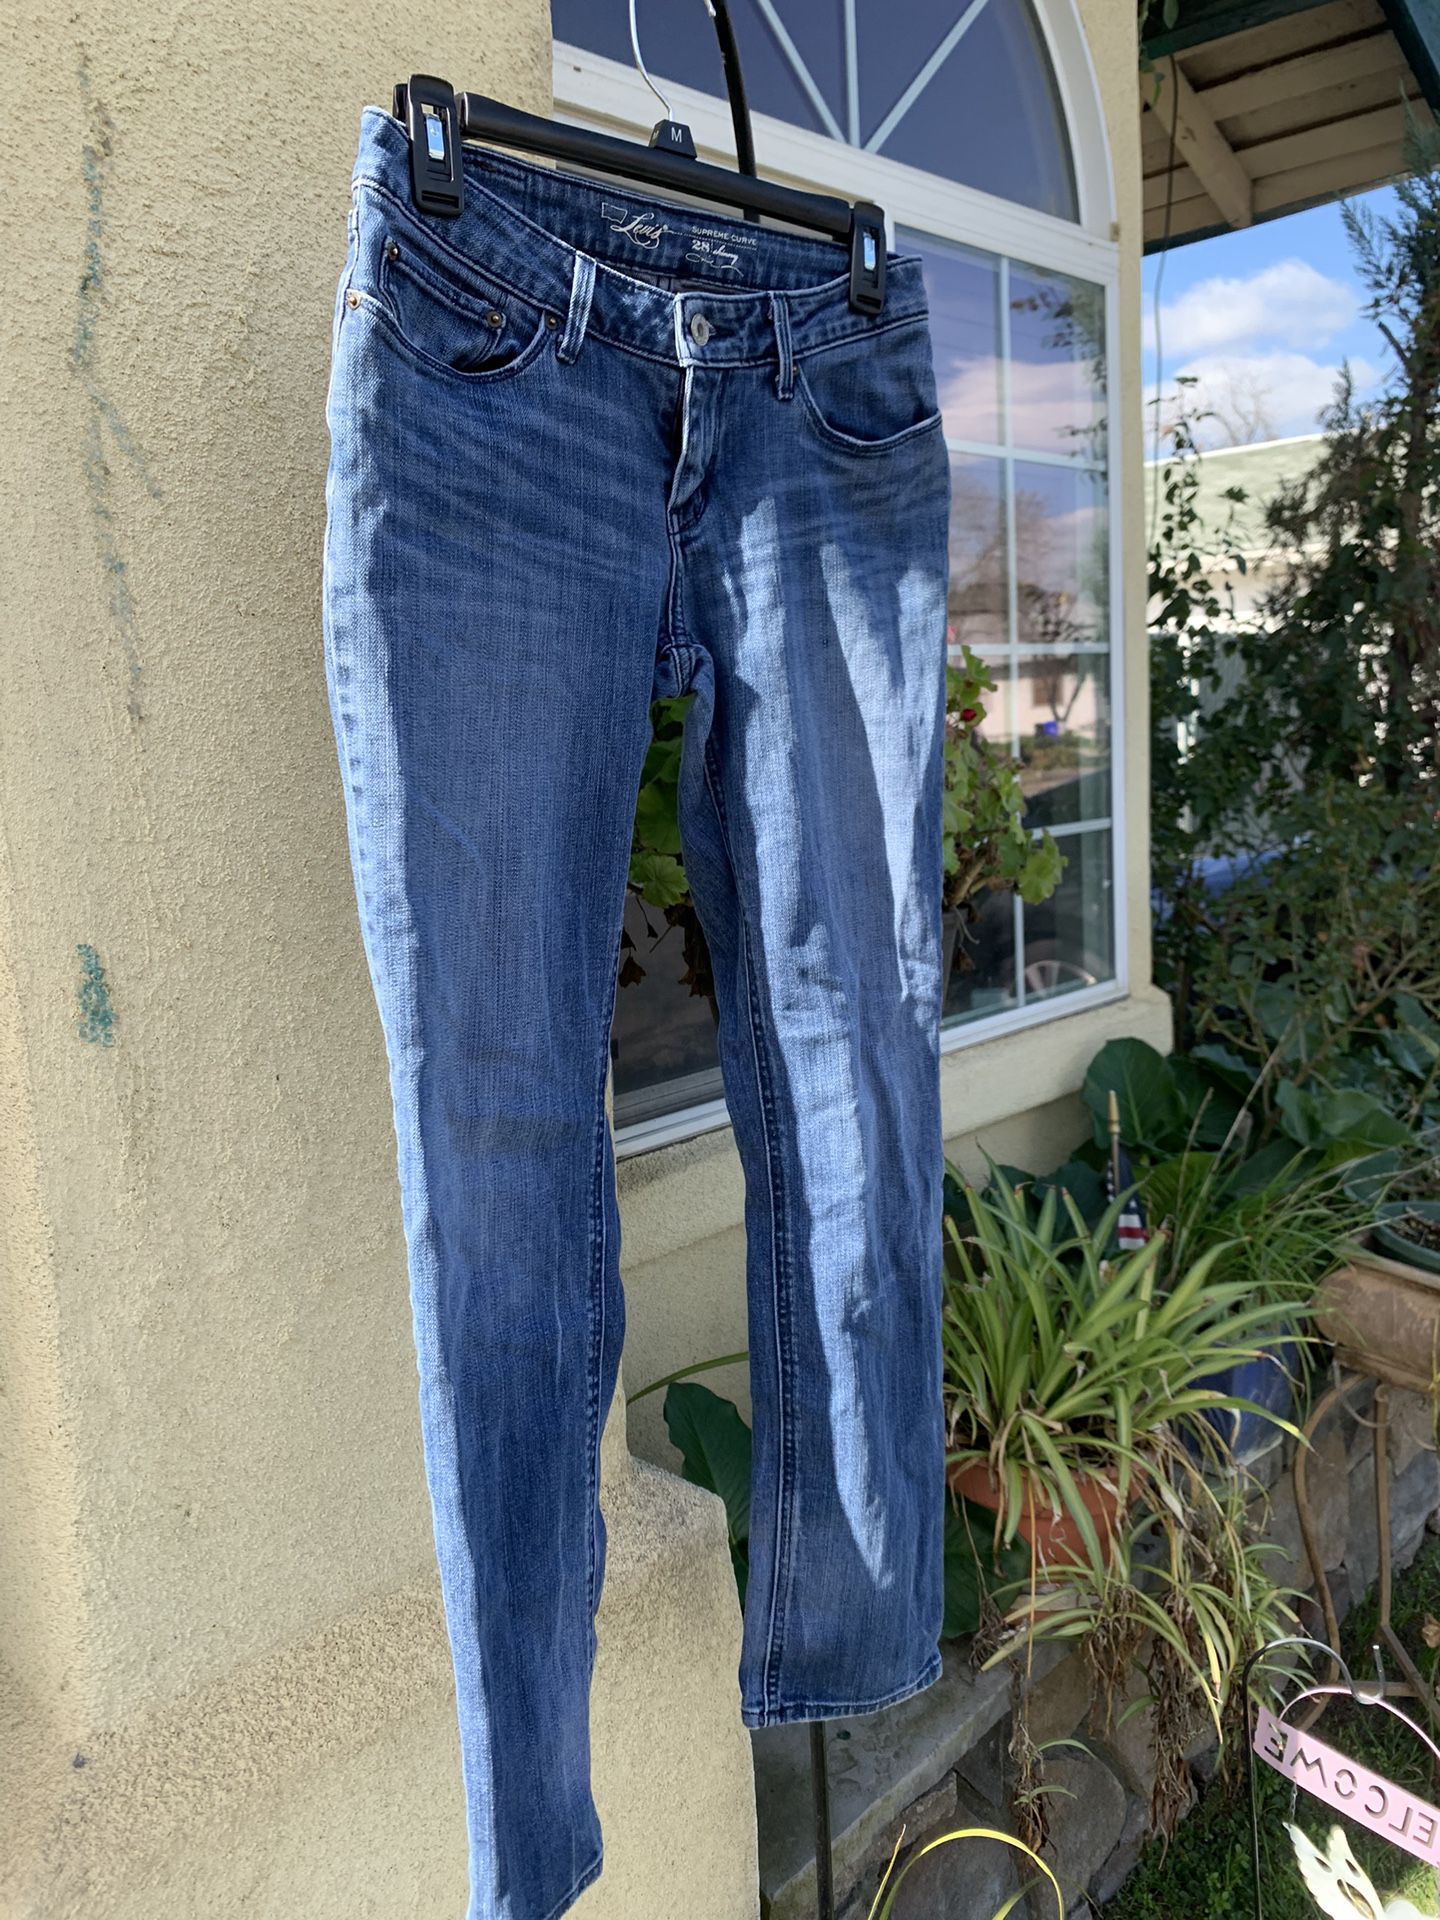 Levi's Supreme Curve Skinny Jeans for Sale in Woodville, CA - OfferUp